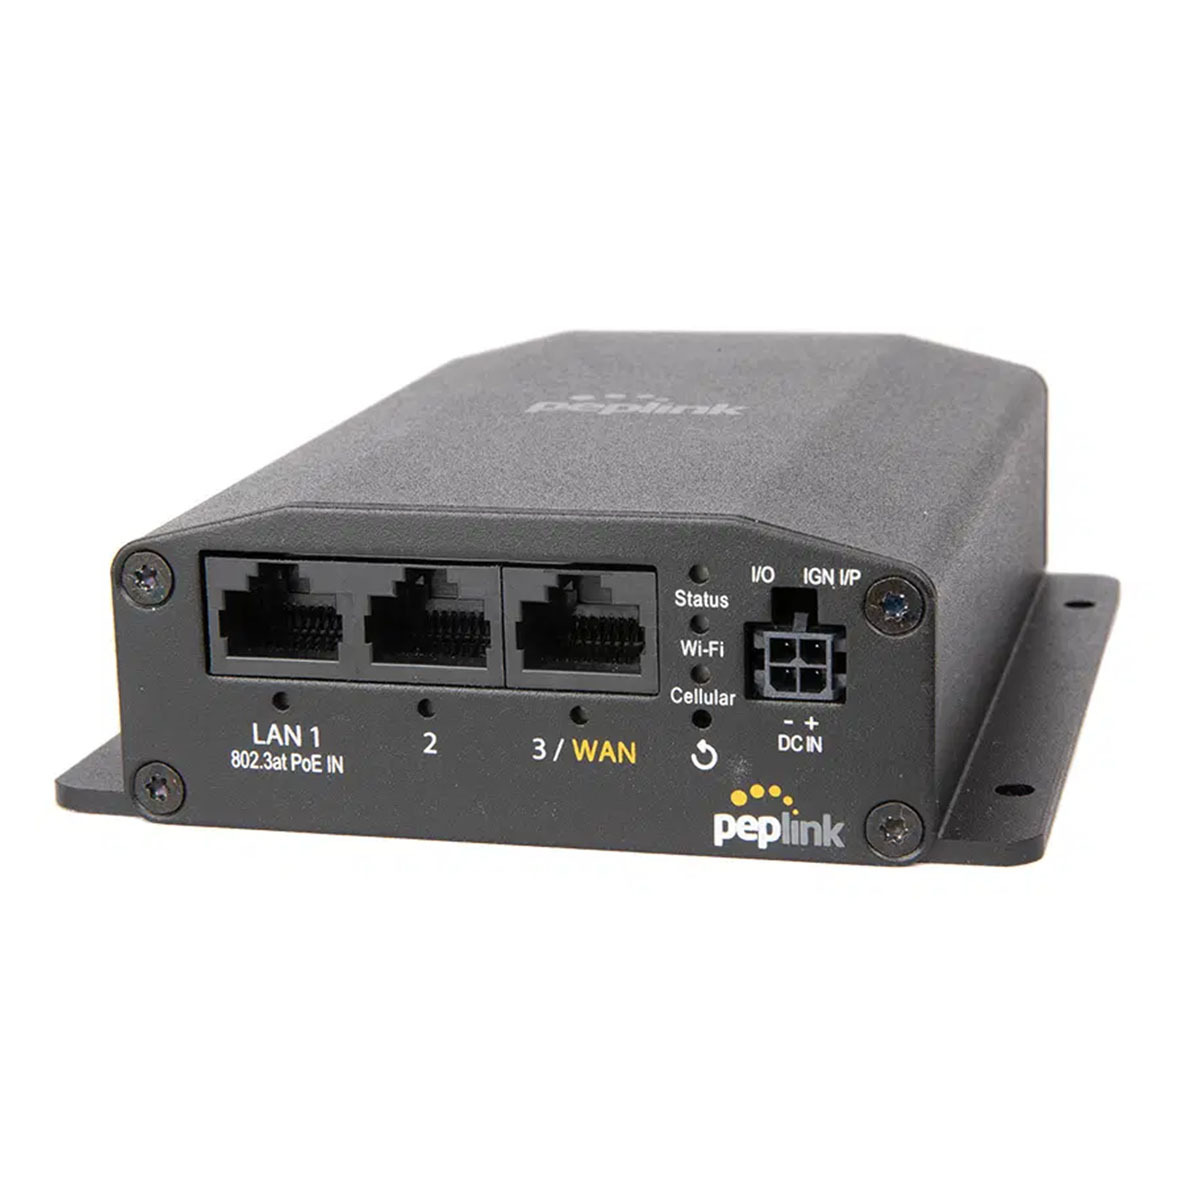 Peplink Feature Pack for MAX BR1 Mini HW3 enables Ethernet WAN, Wi-Fi WAN, Hot Failover, Smoothing, GPIO & Ignition Sensing (Perpetual)